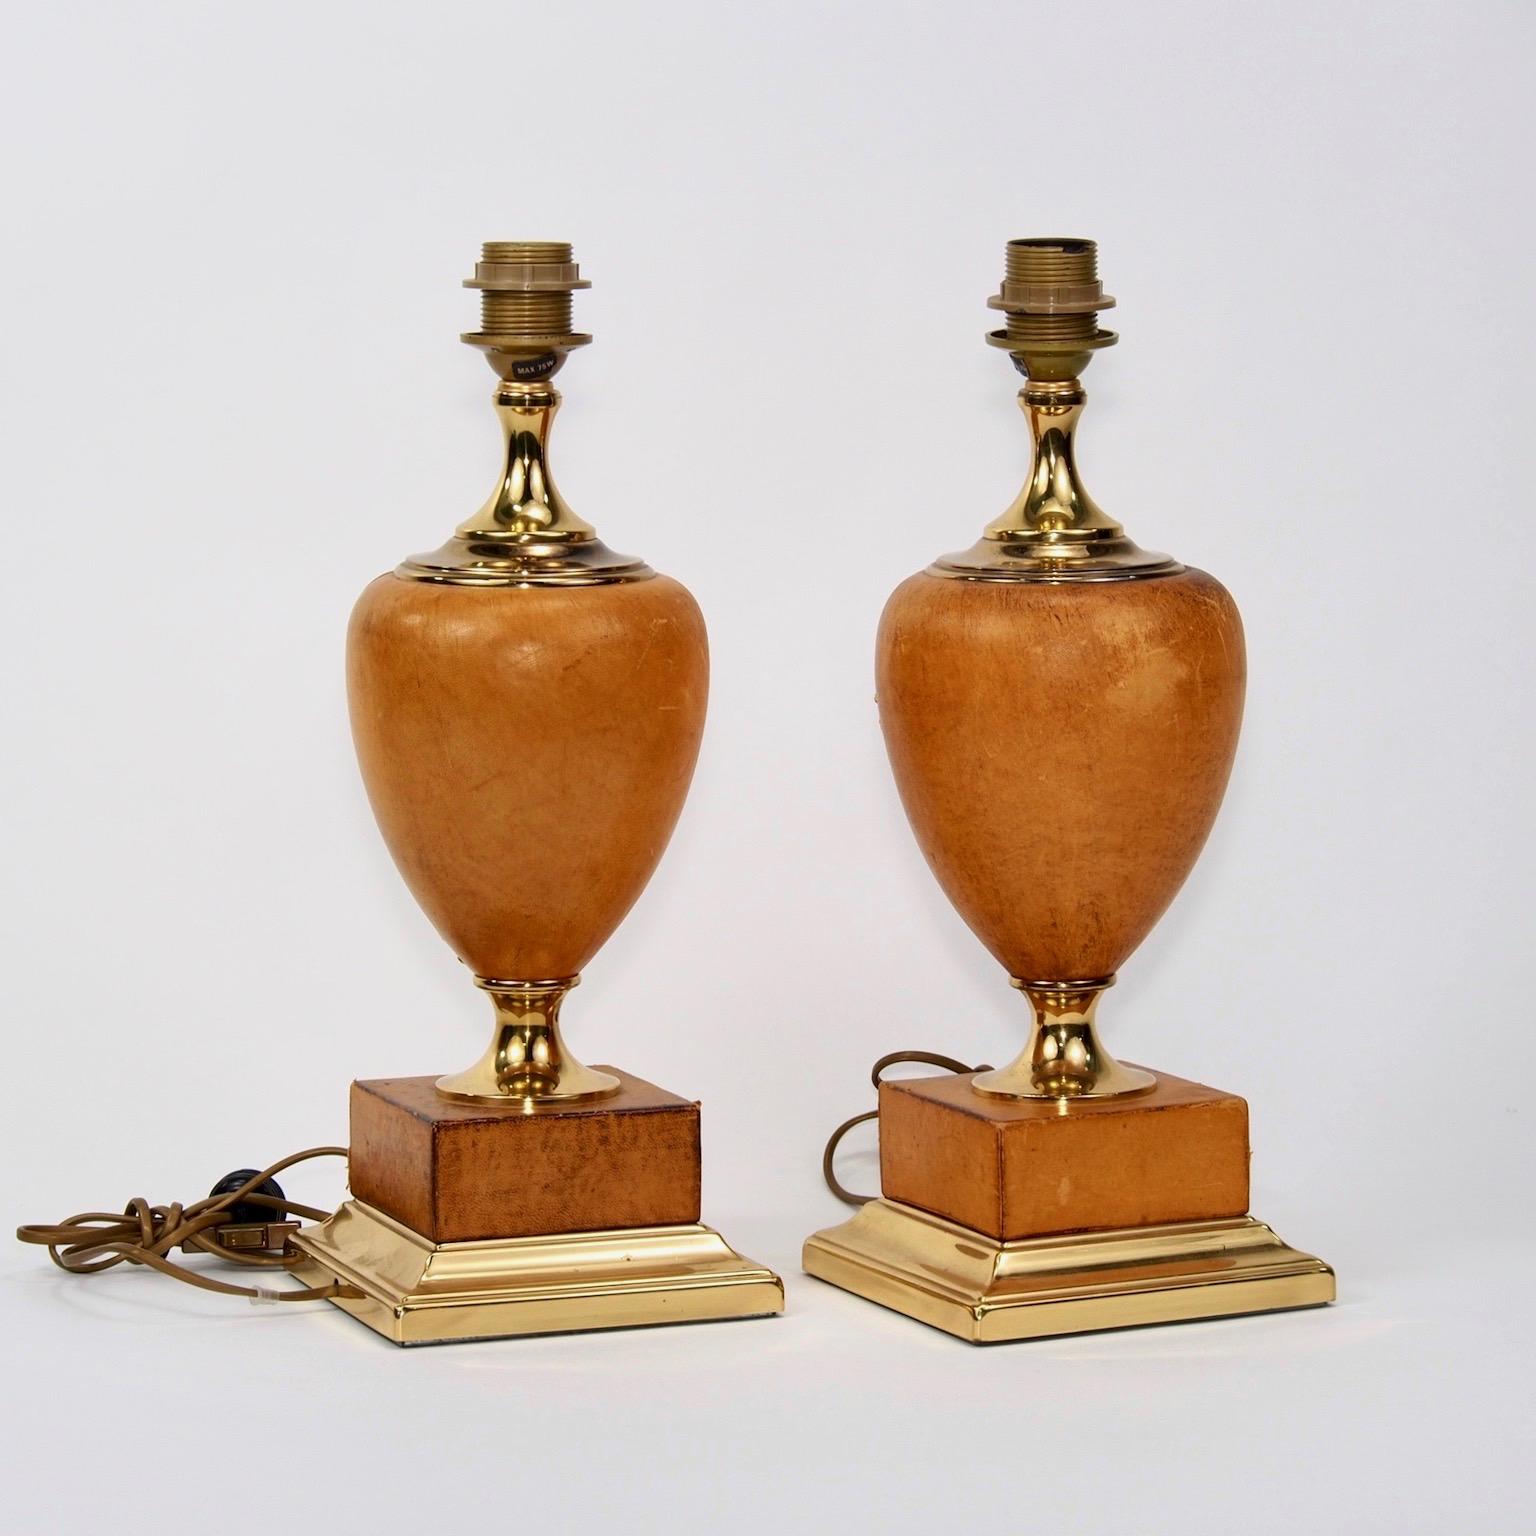 Found in Italy, this pair of leather covered and brass lamps date from 1940. Lamps feature leather-covered base mounted on polished brass pedestals, brass hardware and Classic urn-shaped leather-covered bodies with single standard sized sockets. New